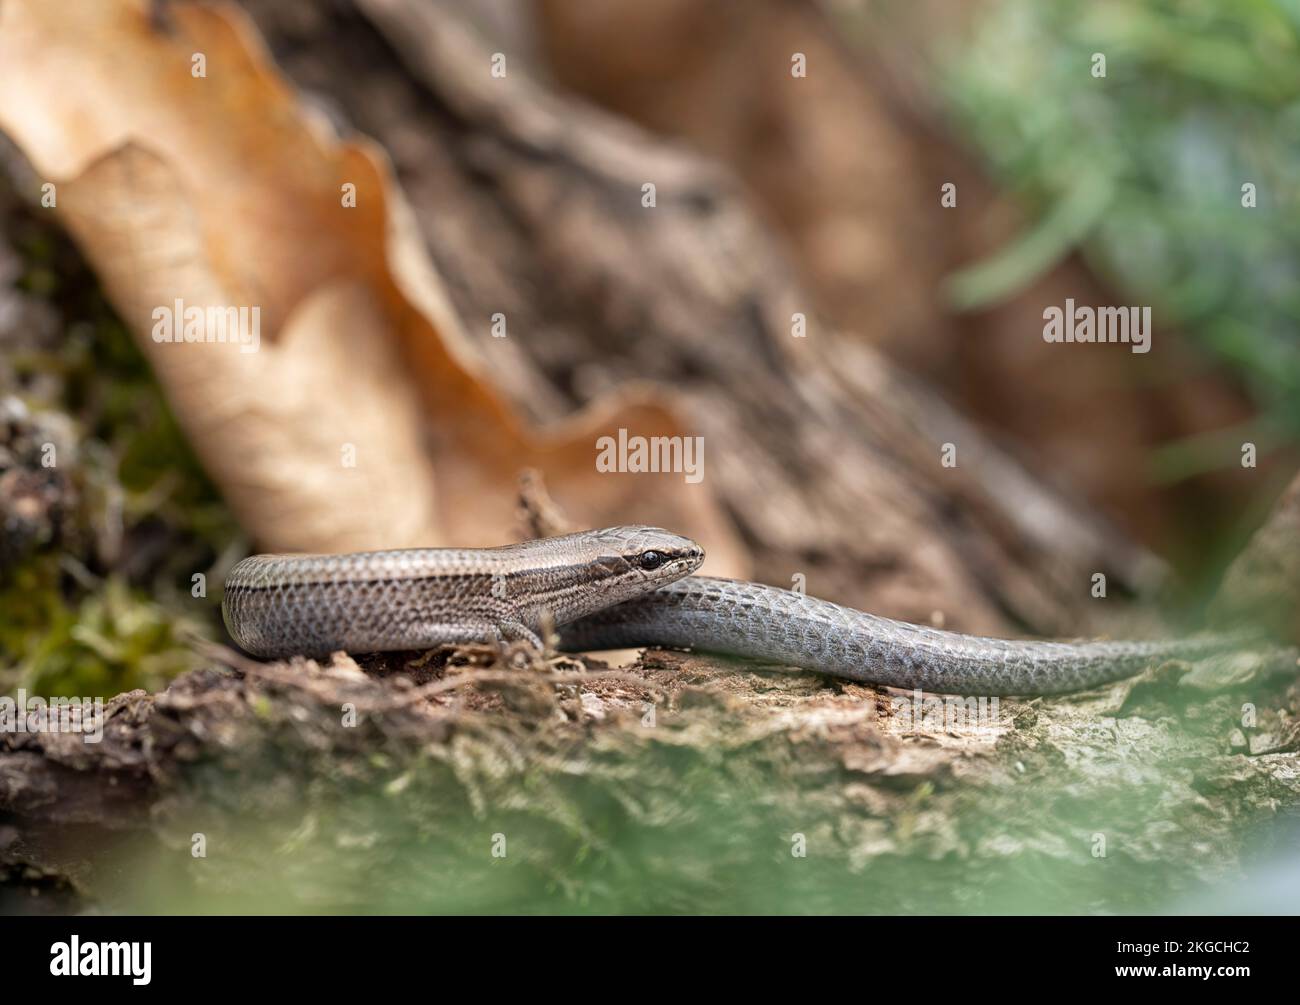 A closeup shot of a European copper skink crawling on the ground in a forest on a blurred background Stock Photo